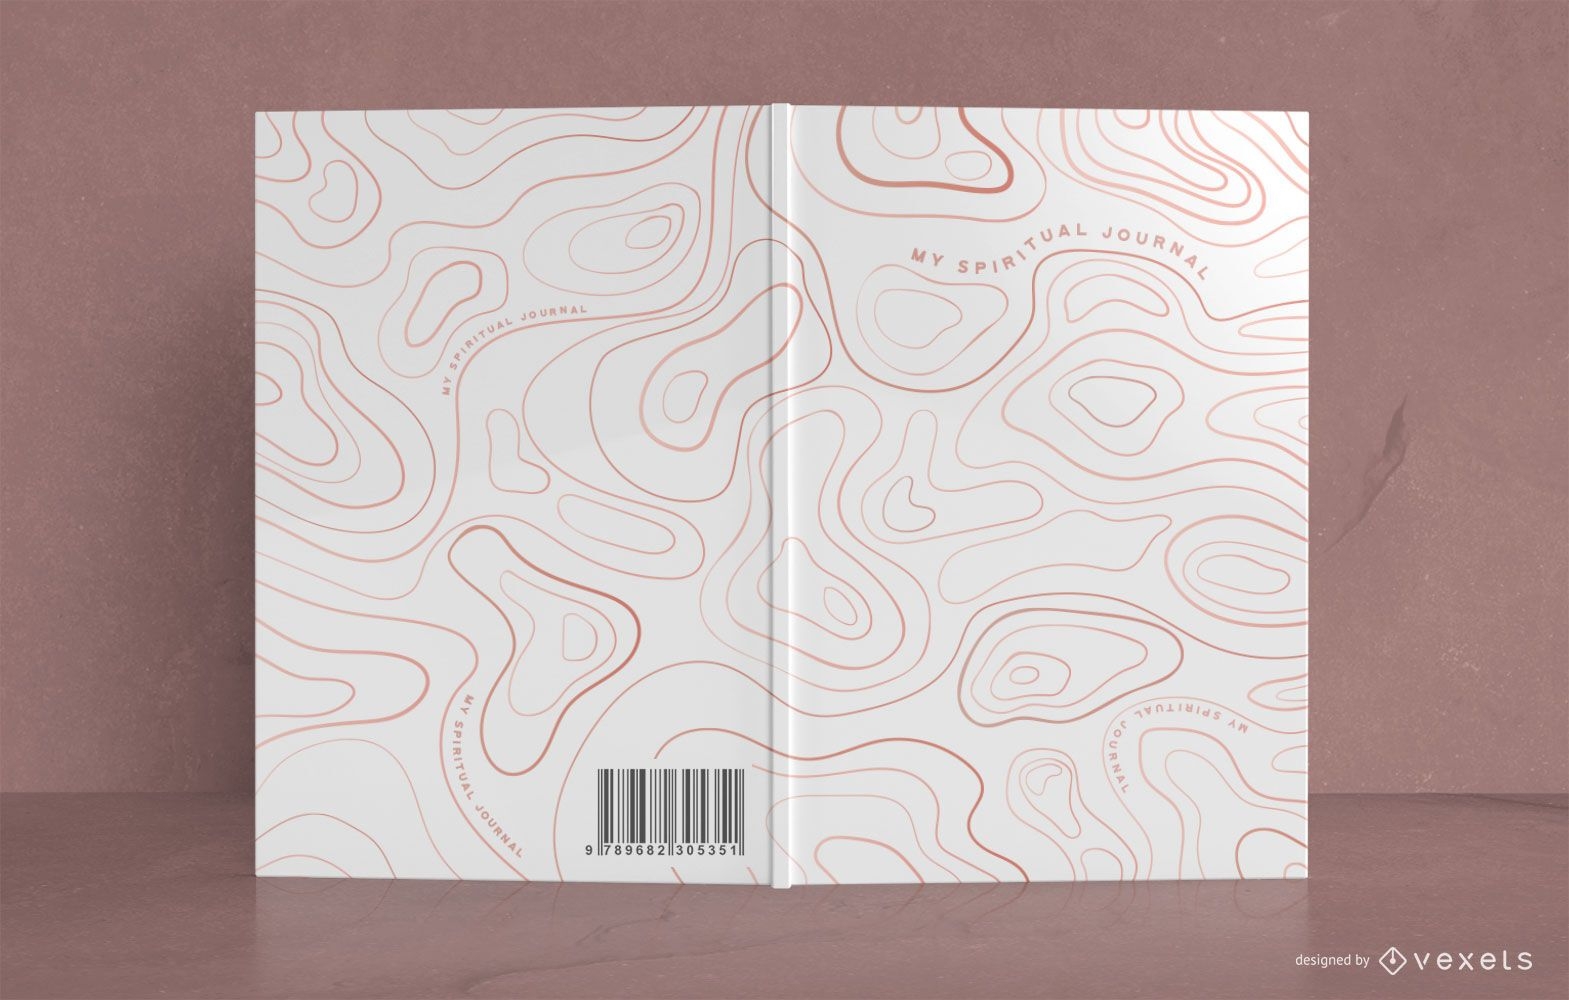 Spiritual journal abstract book cover